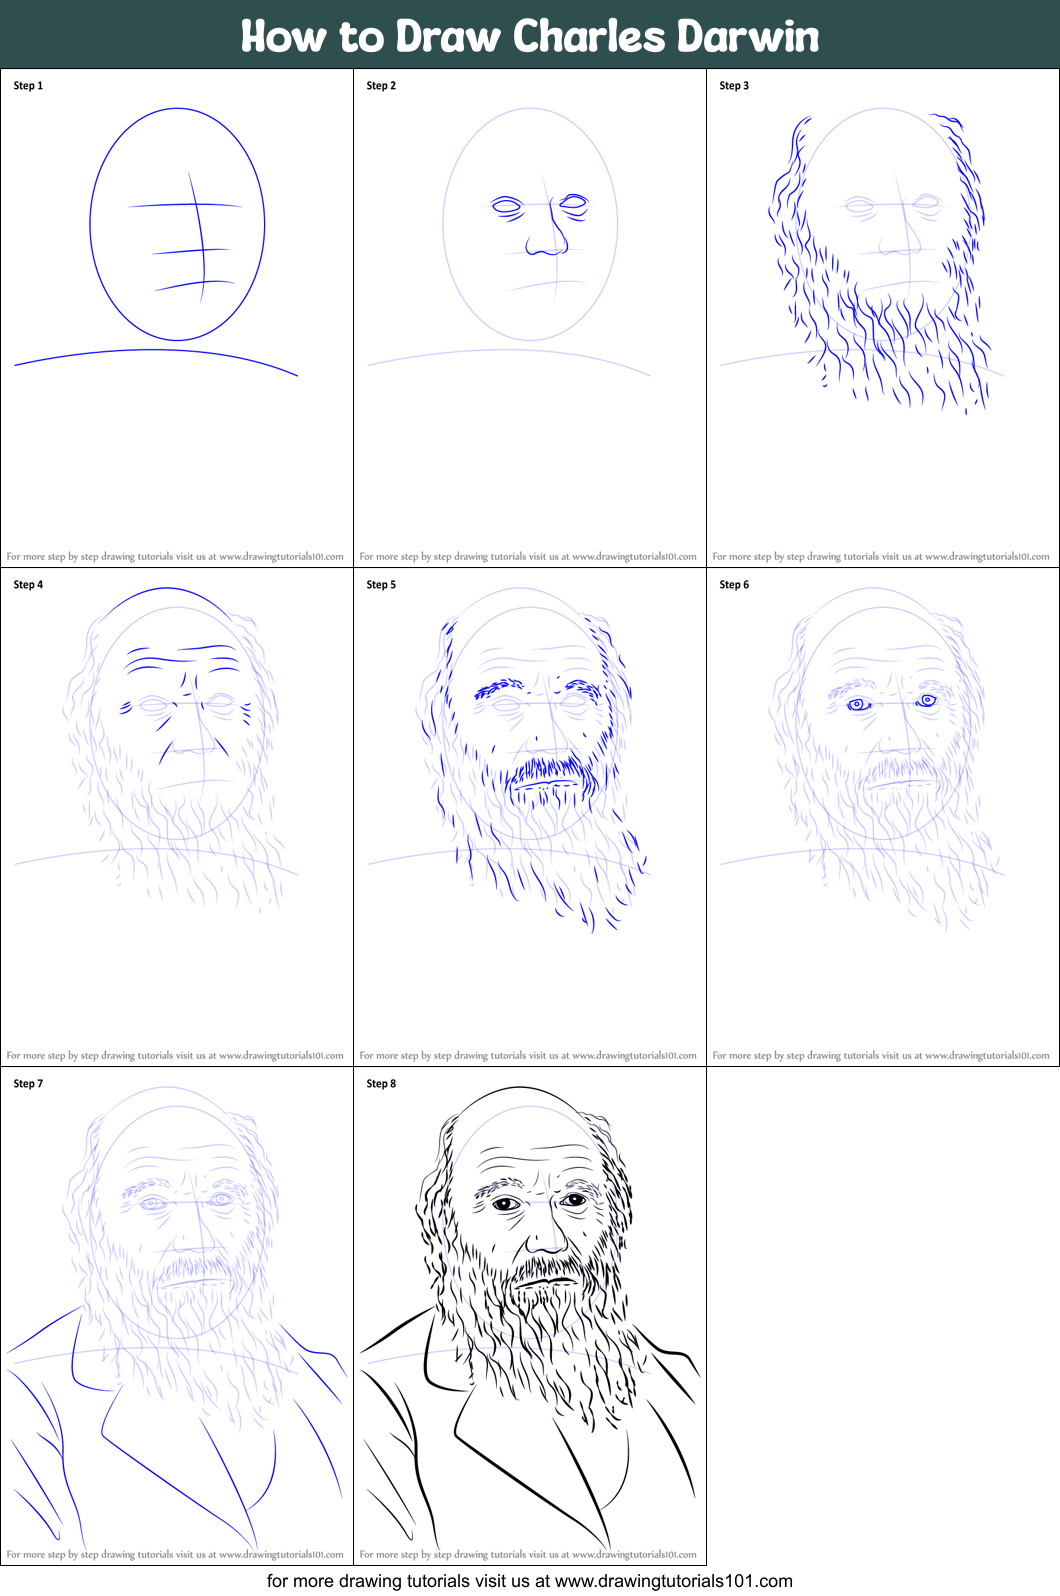 How to Draw Charles Darwin printable step by step drawing sheet